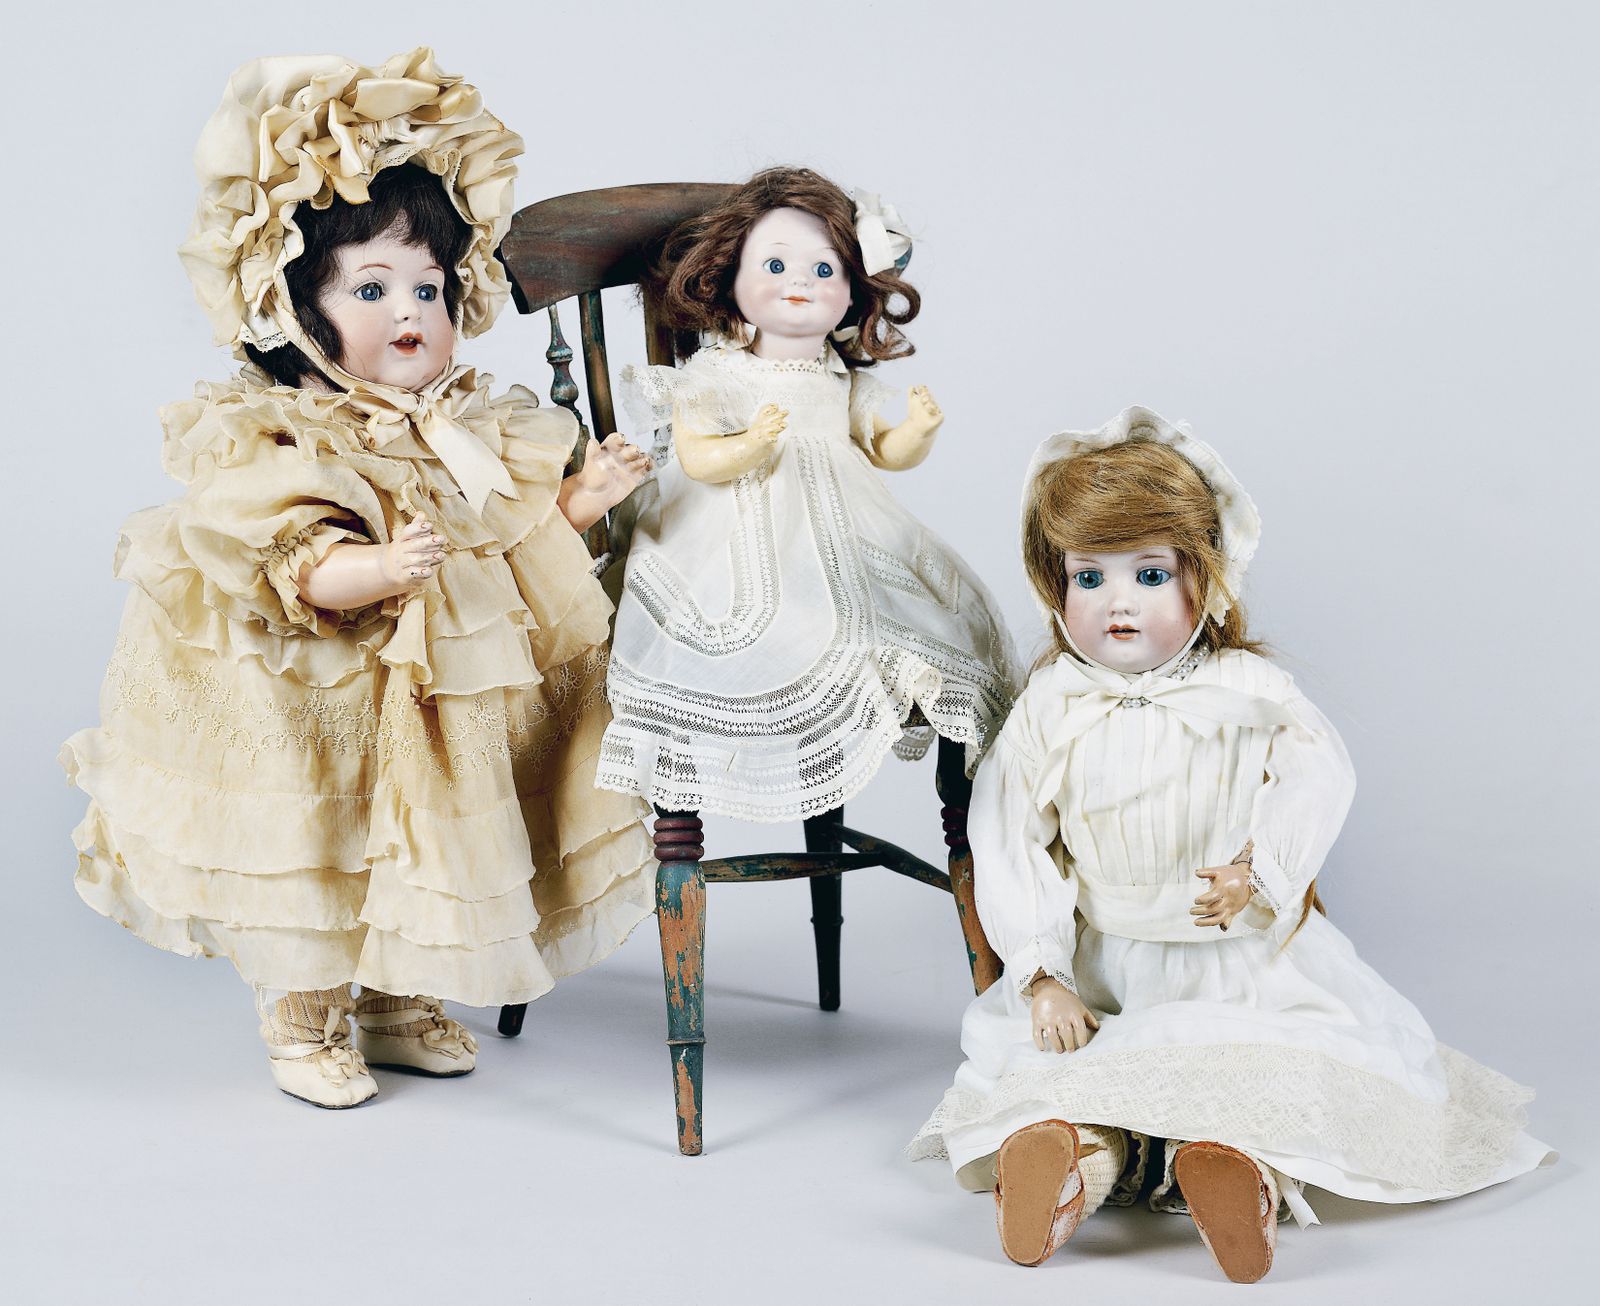 How To Store Porcelain Dolls